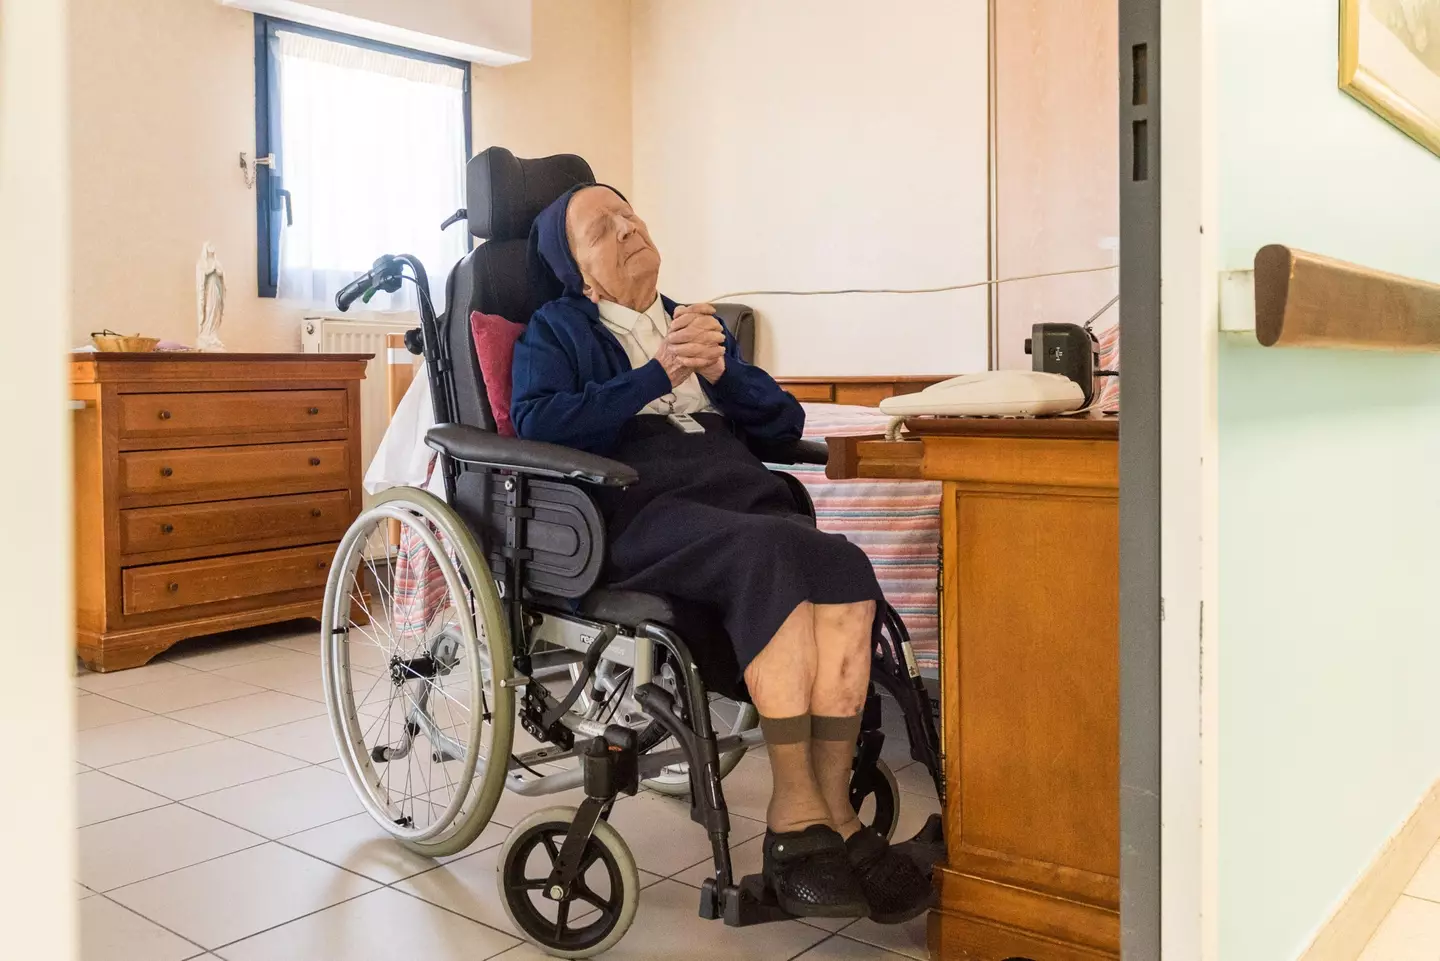 The nun has been named the world's oldest person following the passing of Kane Tanaka.